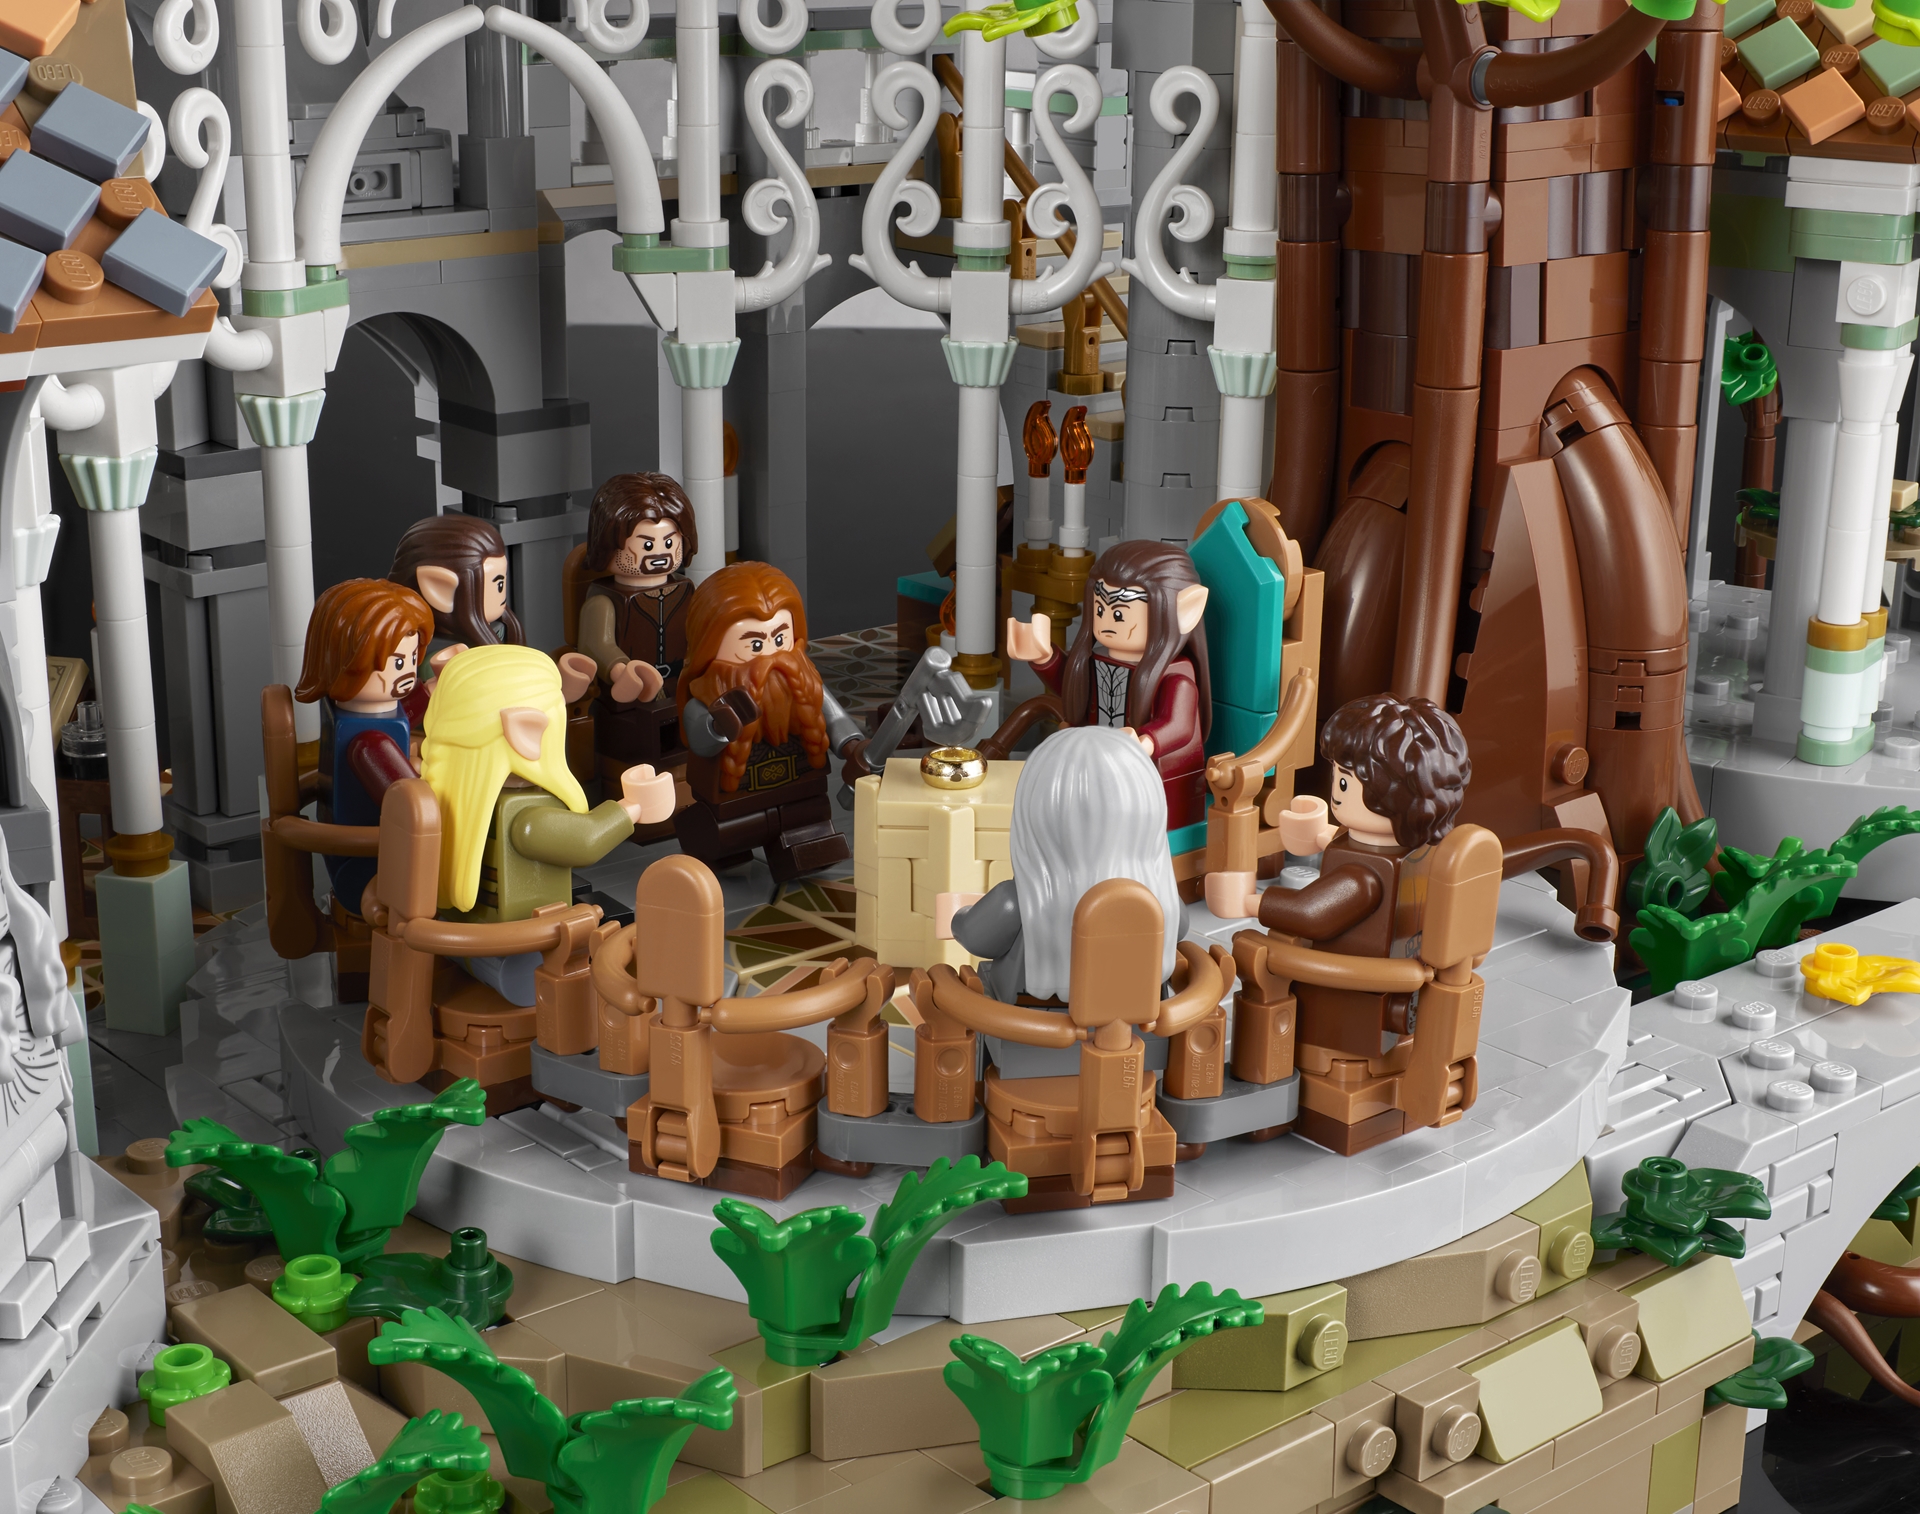 More than 6000pcs! 10316 THE LORD OF THE RINGS: RIVENDELL™ LEGO(R)Lord of the Rings Officially Revealed